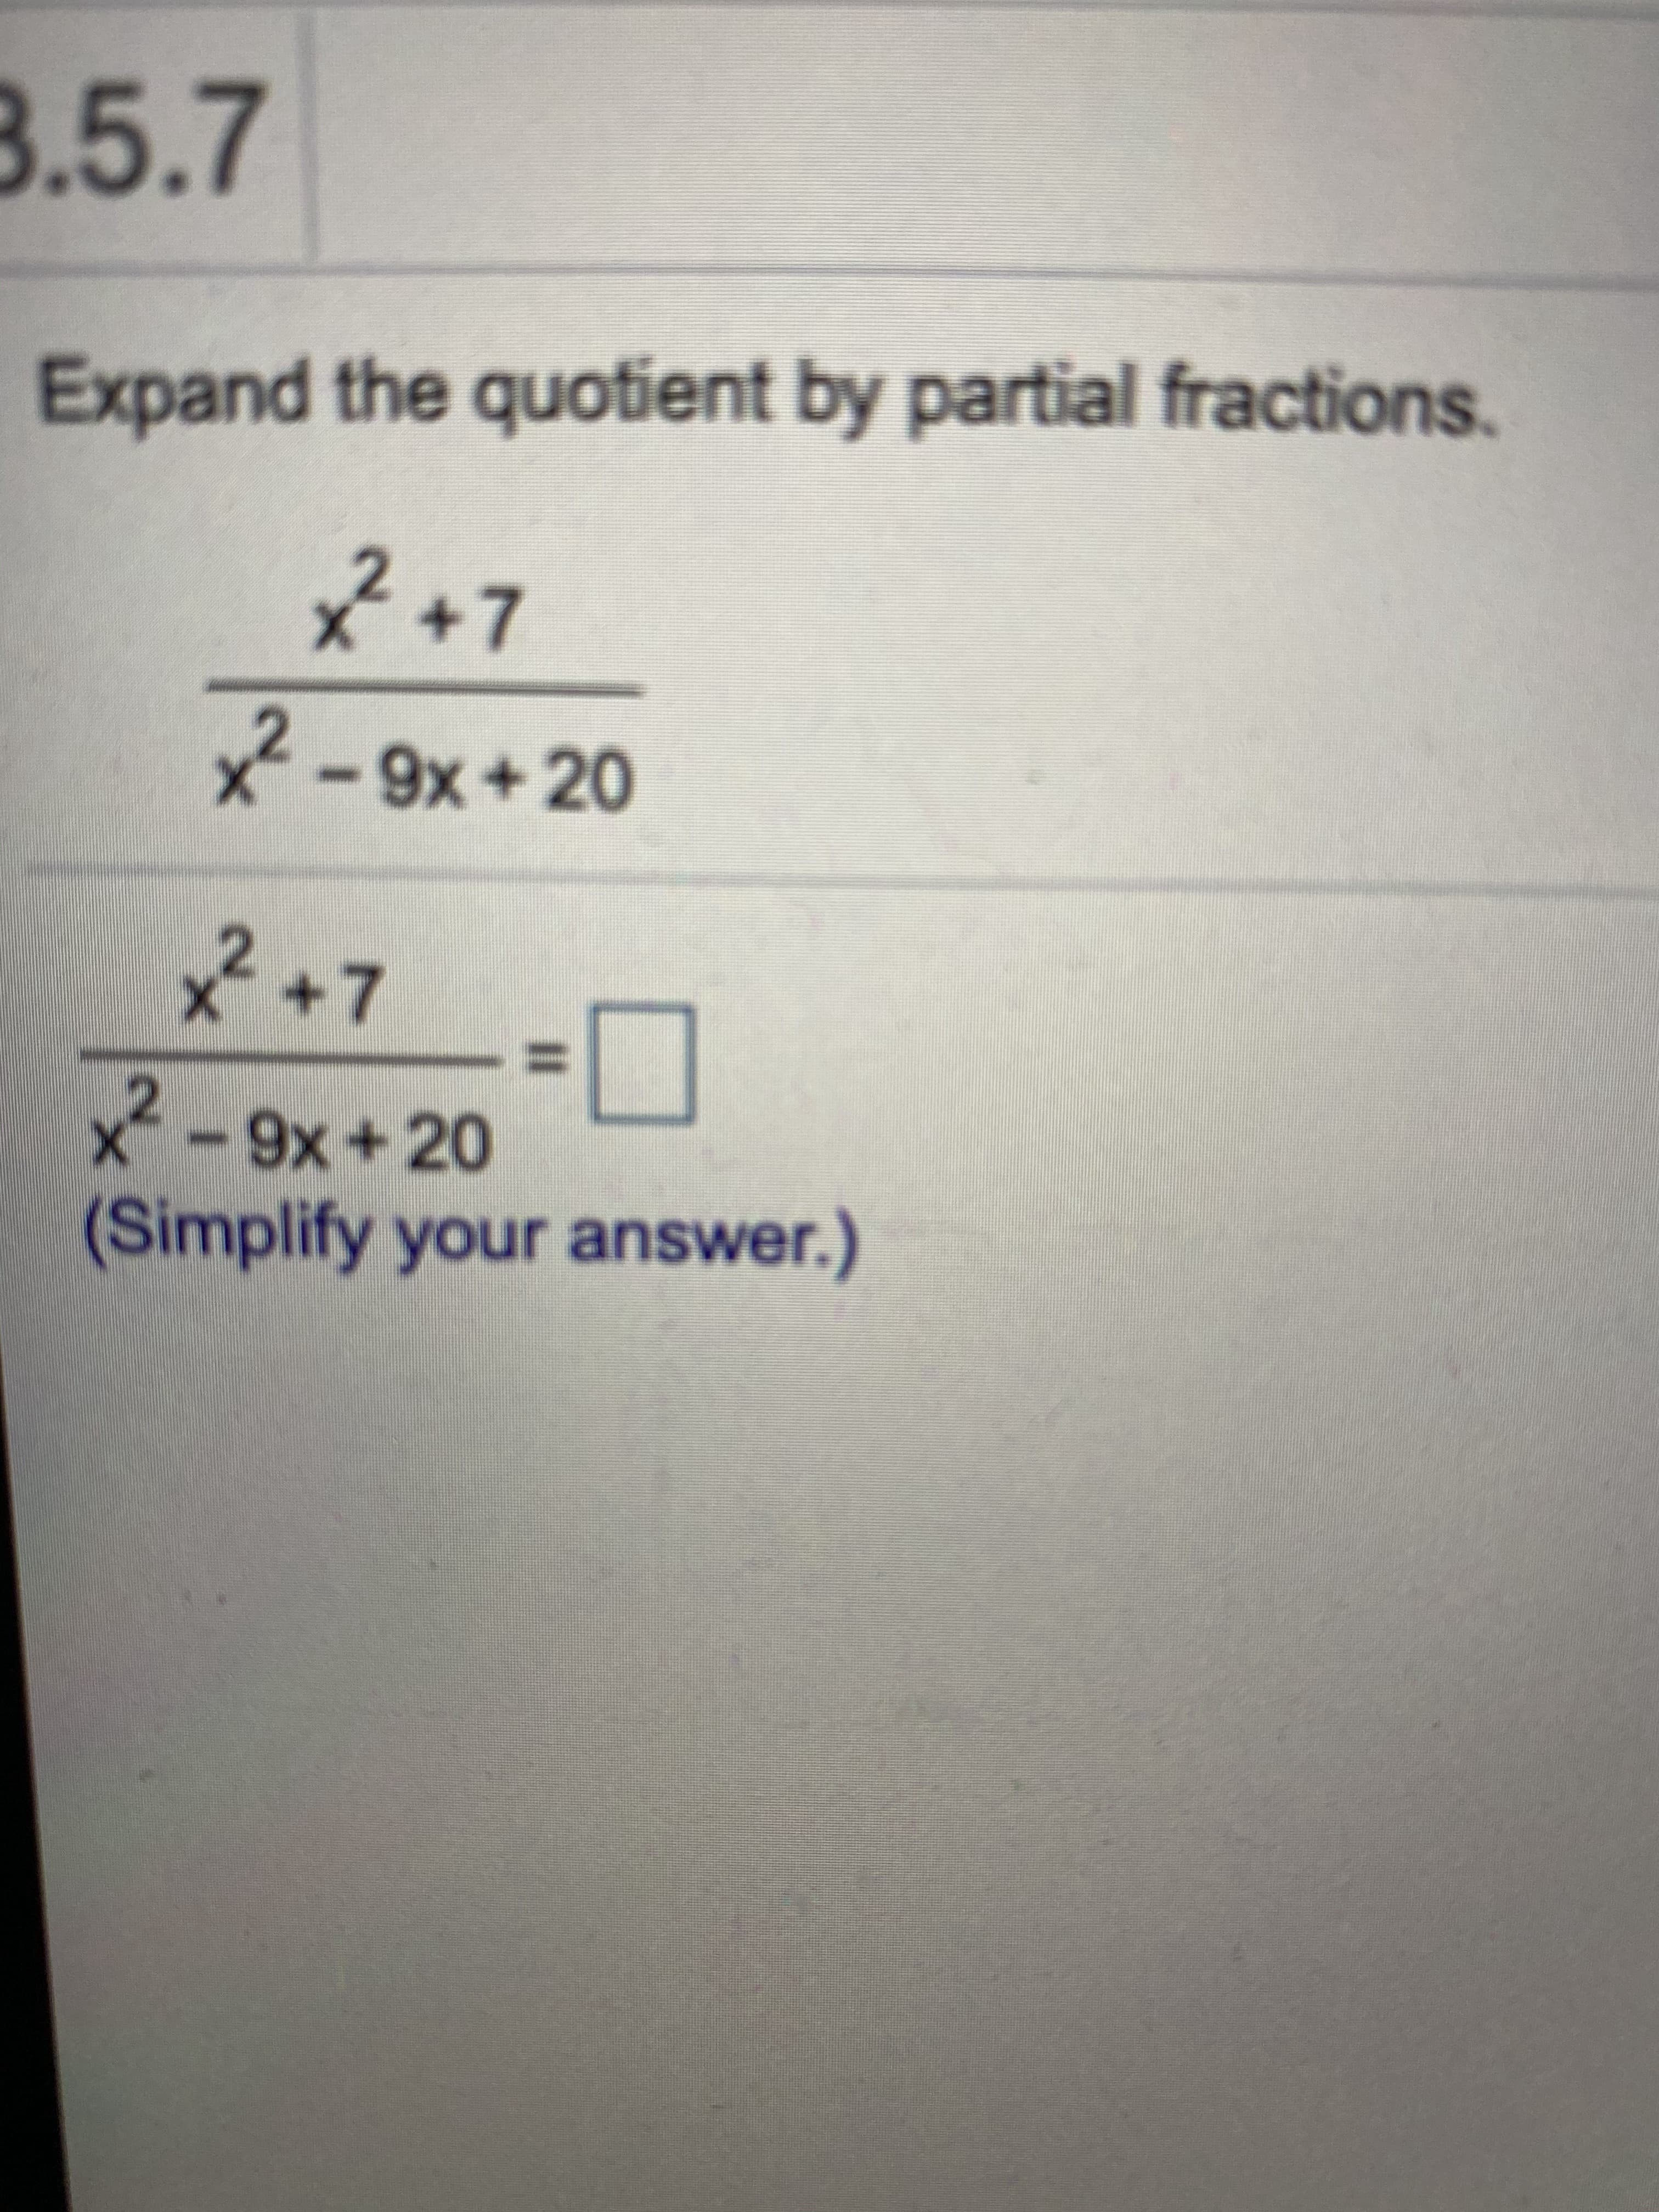 Expand the quotient by partial fractions.
2+7
-9x+20
